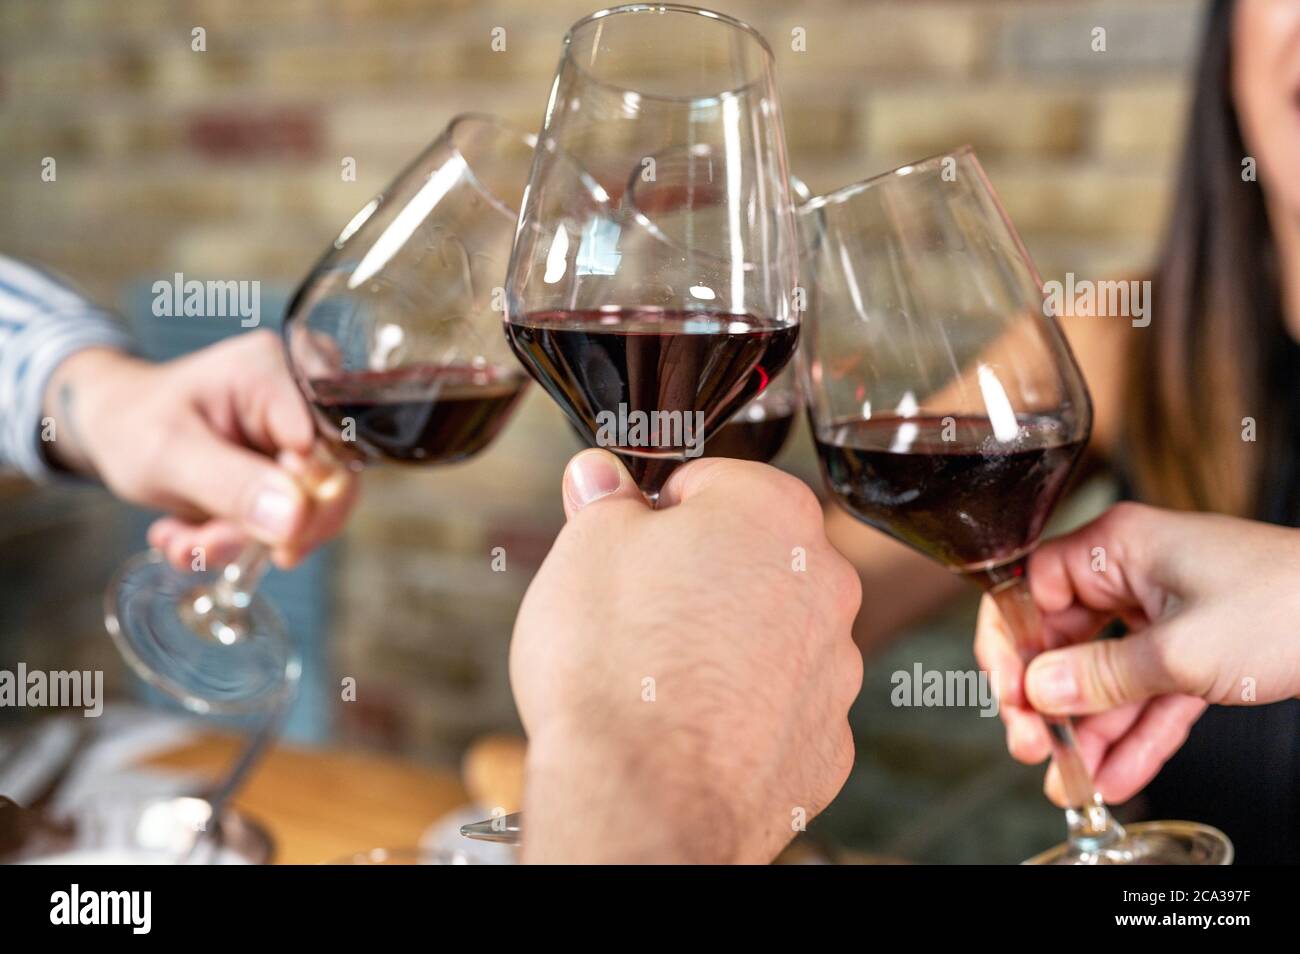 Celebration. Group of friends holding The Glasses Of Wine Making A Toast. High quality photo. Stock Photo